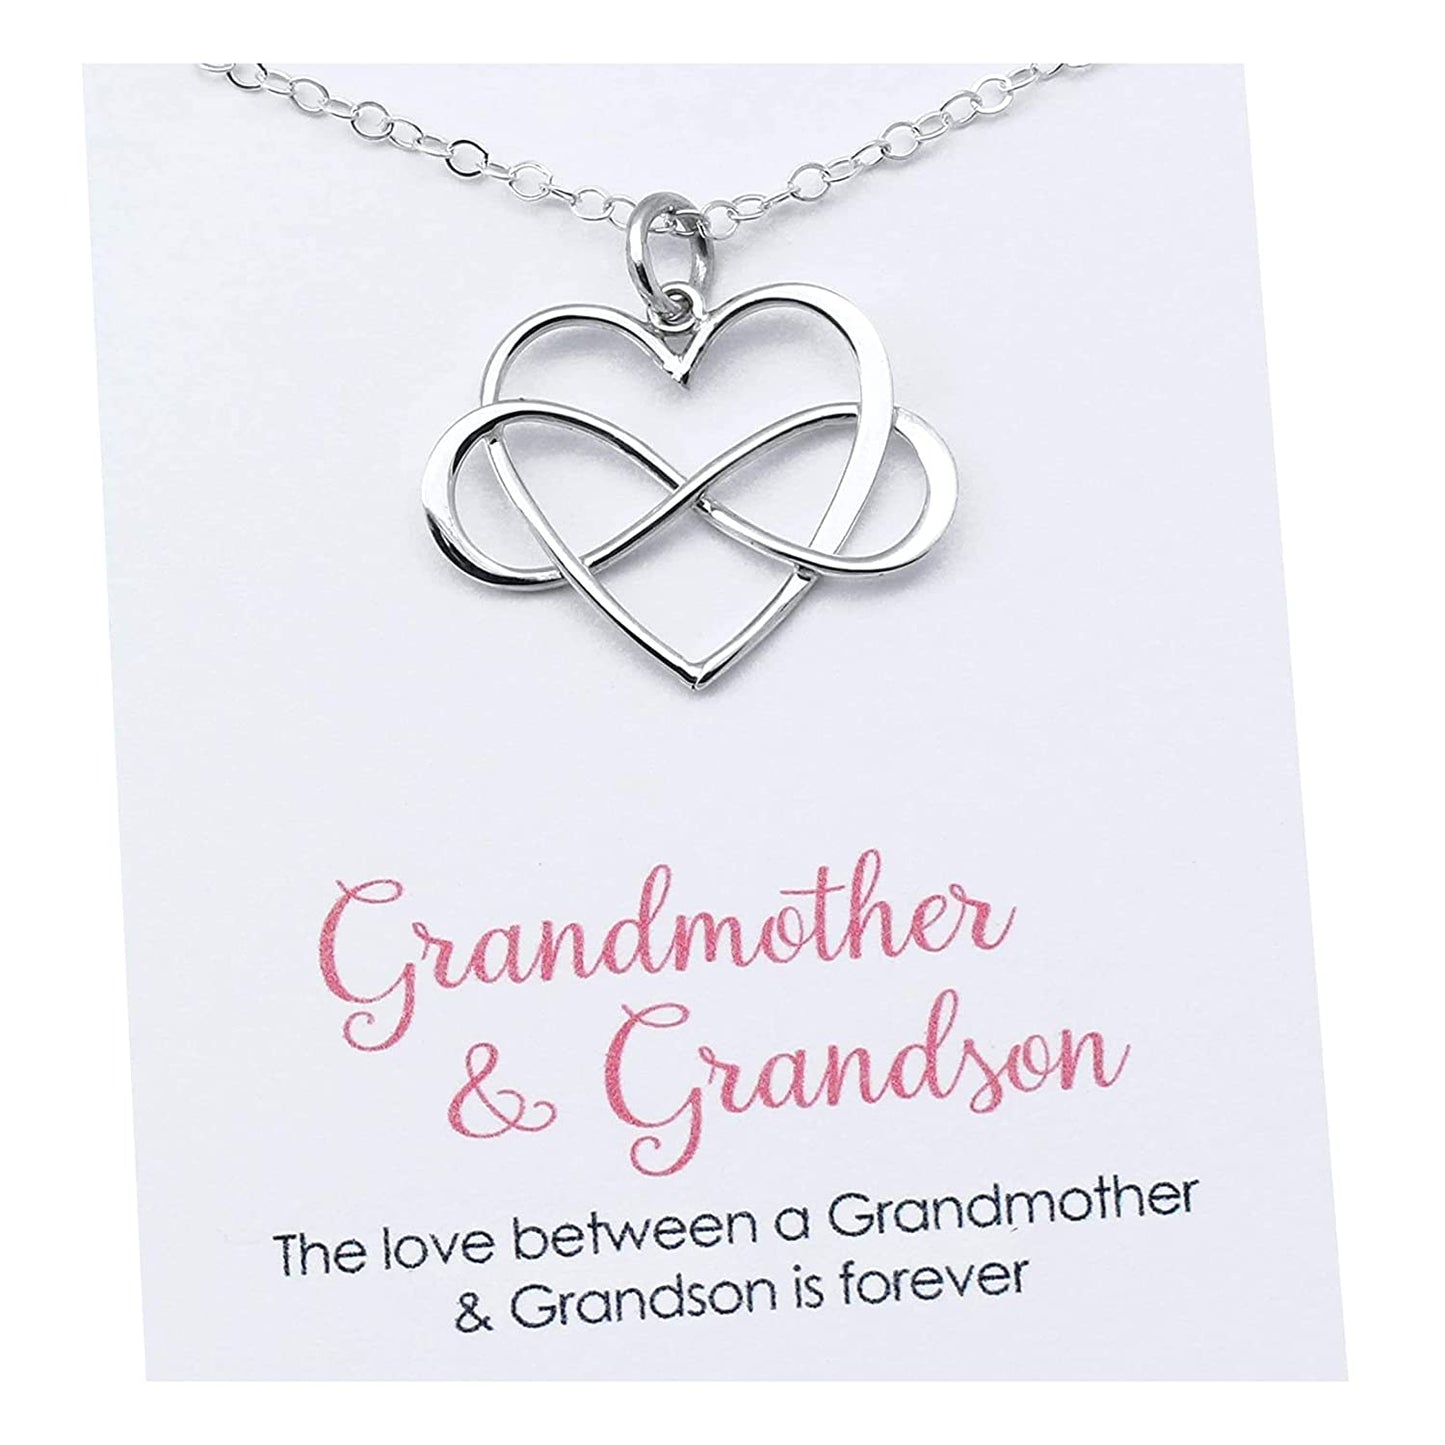 Gift for Grandma • Intentional Grandmother & Grandson Necklace • Infinity Heart Pendant • Sterling Silver • Infinite Love • Jewelry with Meaning